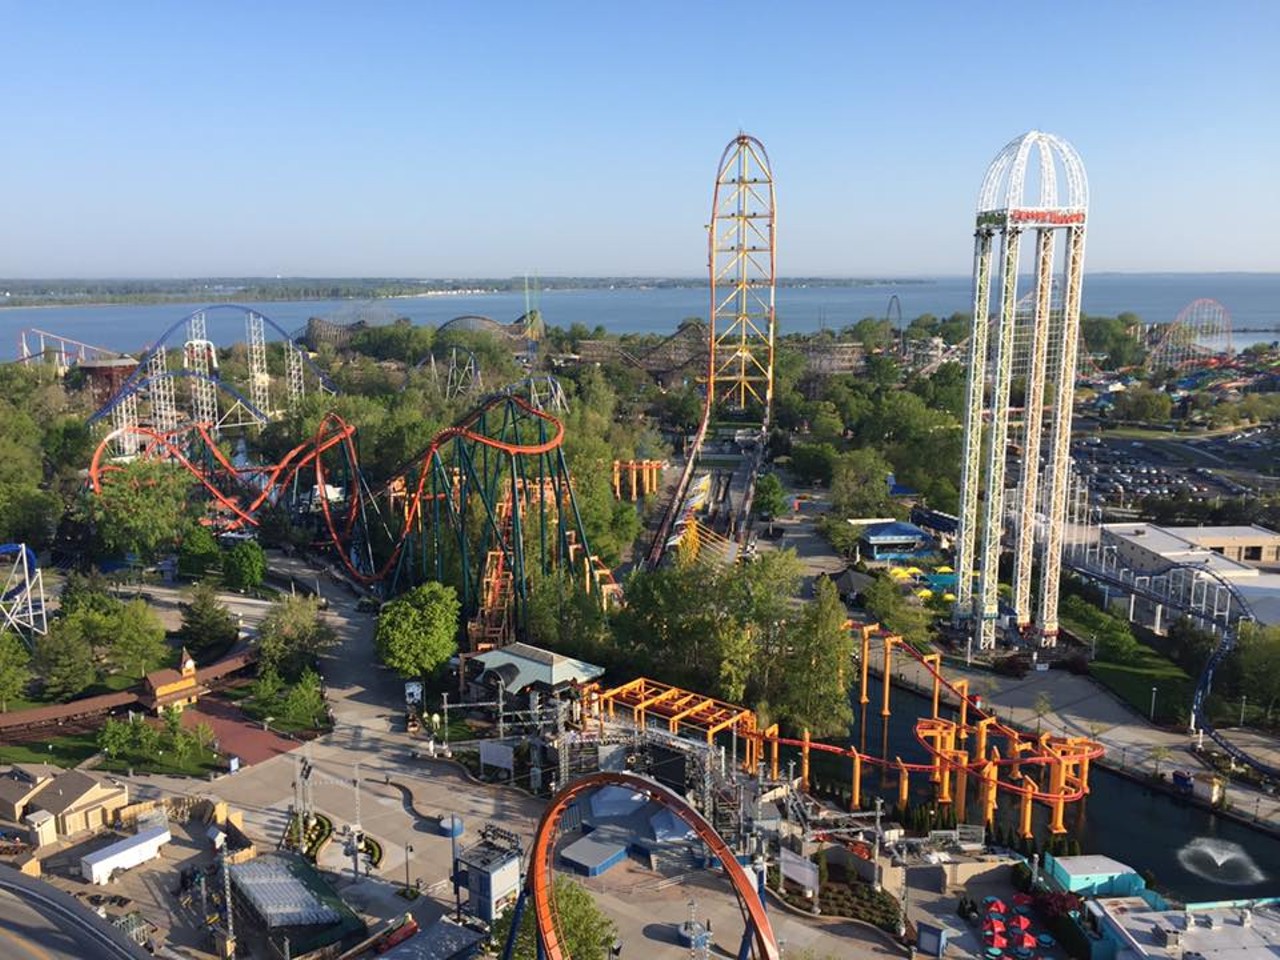 Cedar Point on a crowded, blazing hot summer day in lines that stretch forever surrounded by the sweating, irritated masses